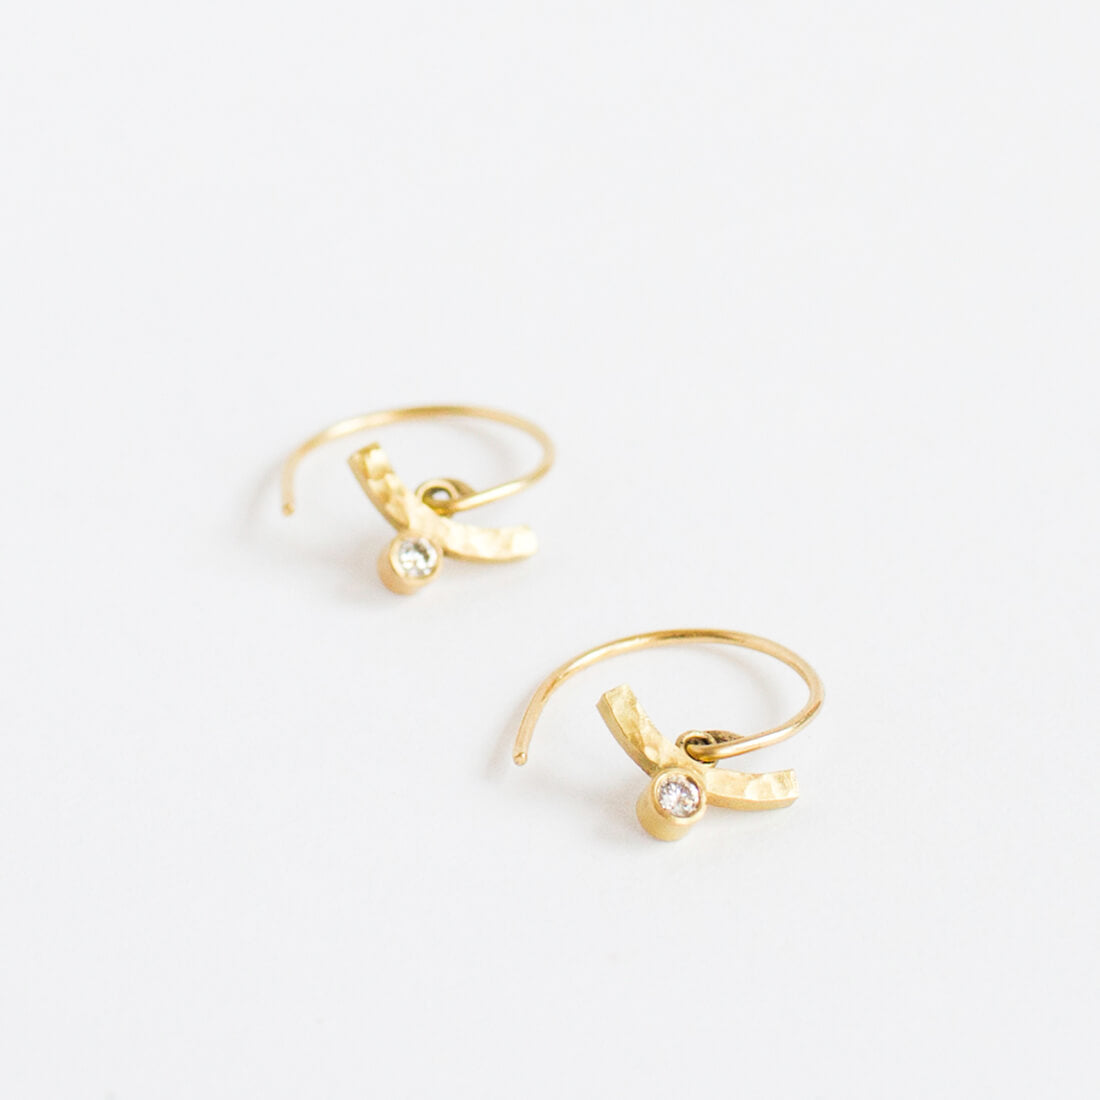 Yellow gold and diamond earrings from EC Design Jewelry in Minneapolis, MN.